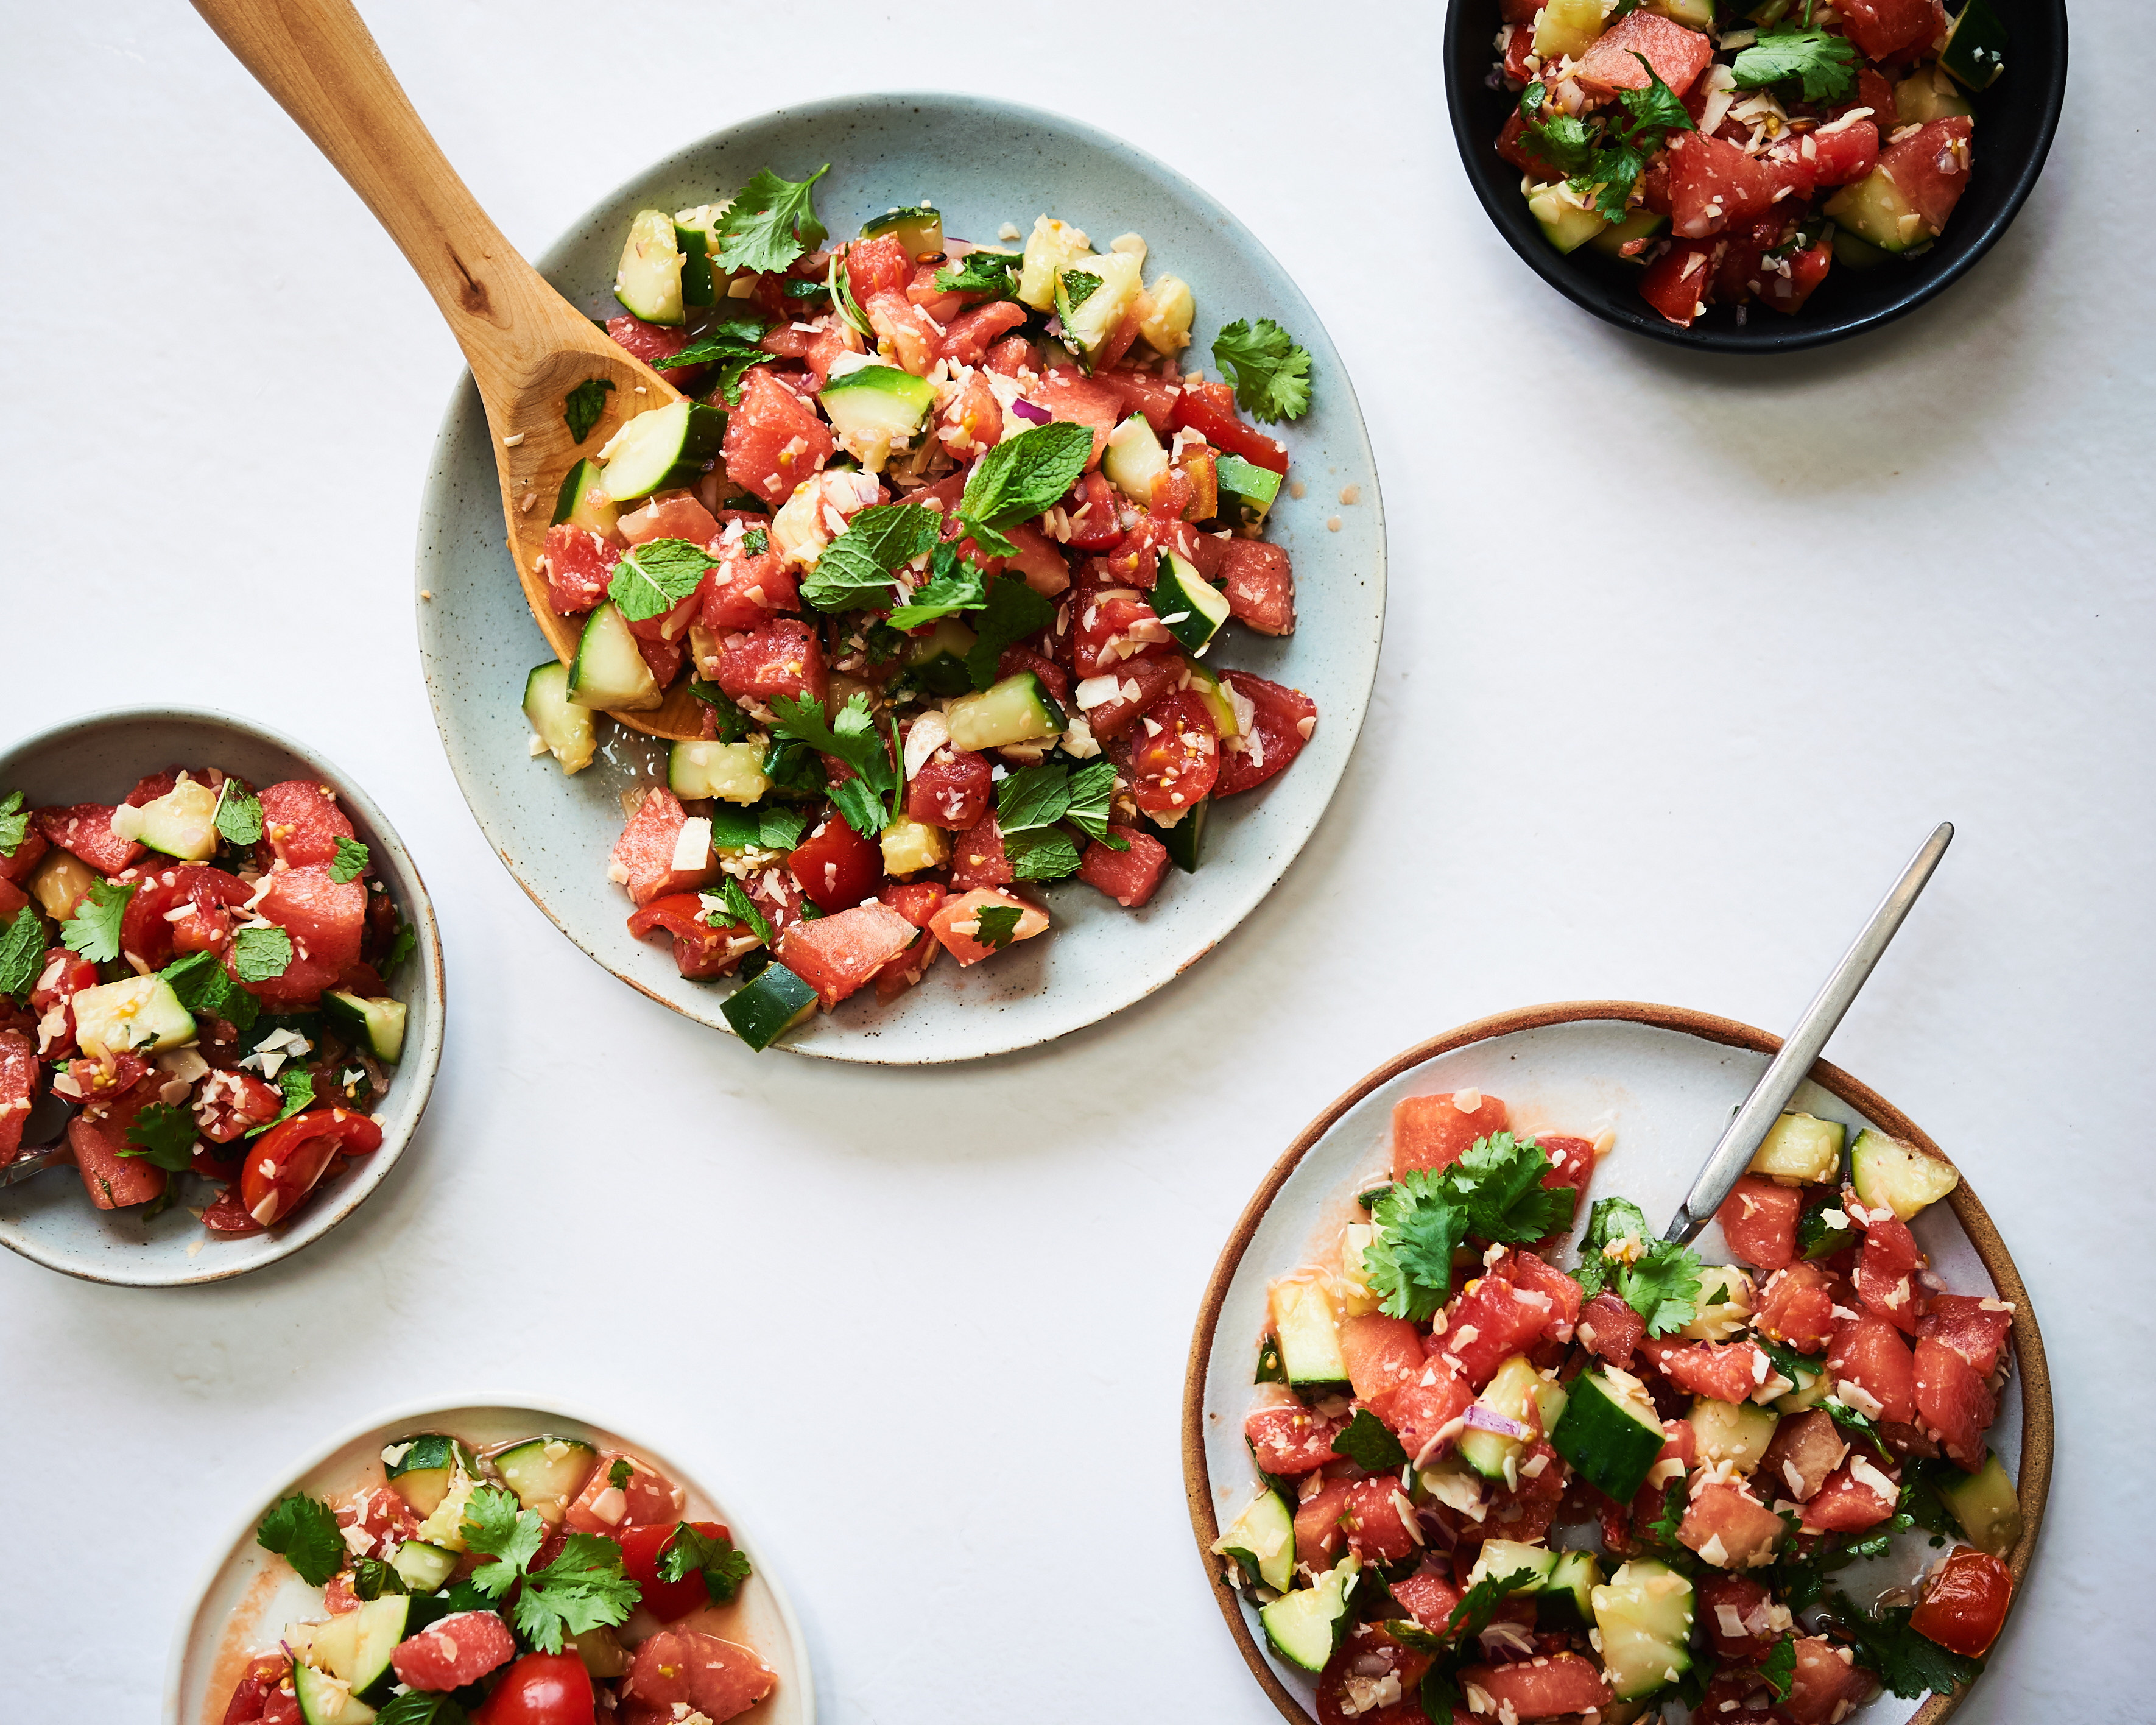 this watermelon salad is dairy free, vegan and gluten free. It's made with watermelon, cucumber, tomato, mint and fresh herbs and is a really delicious salad.